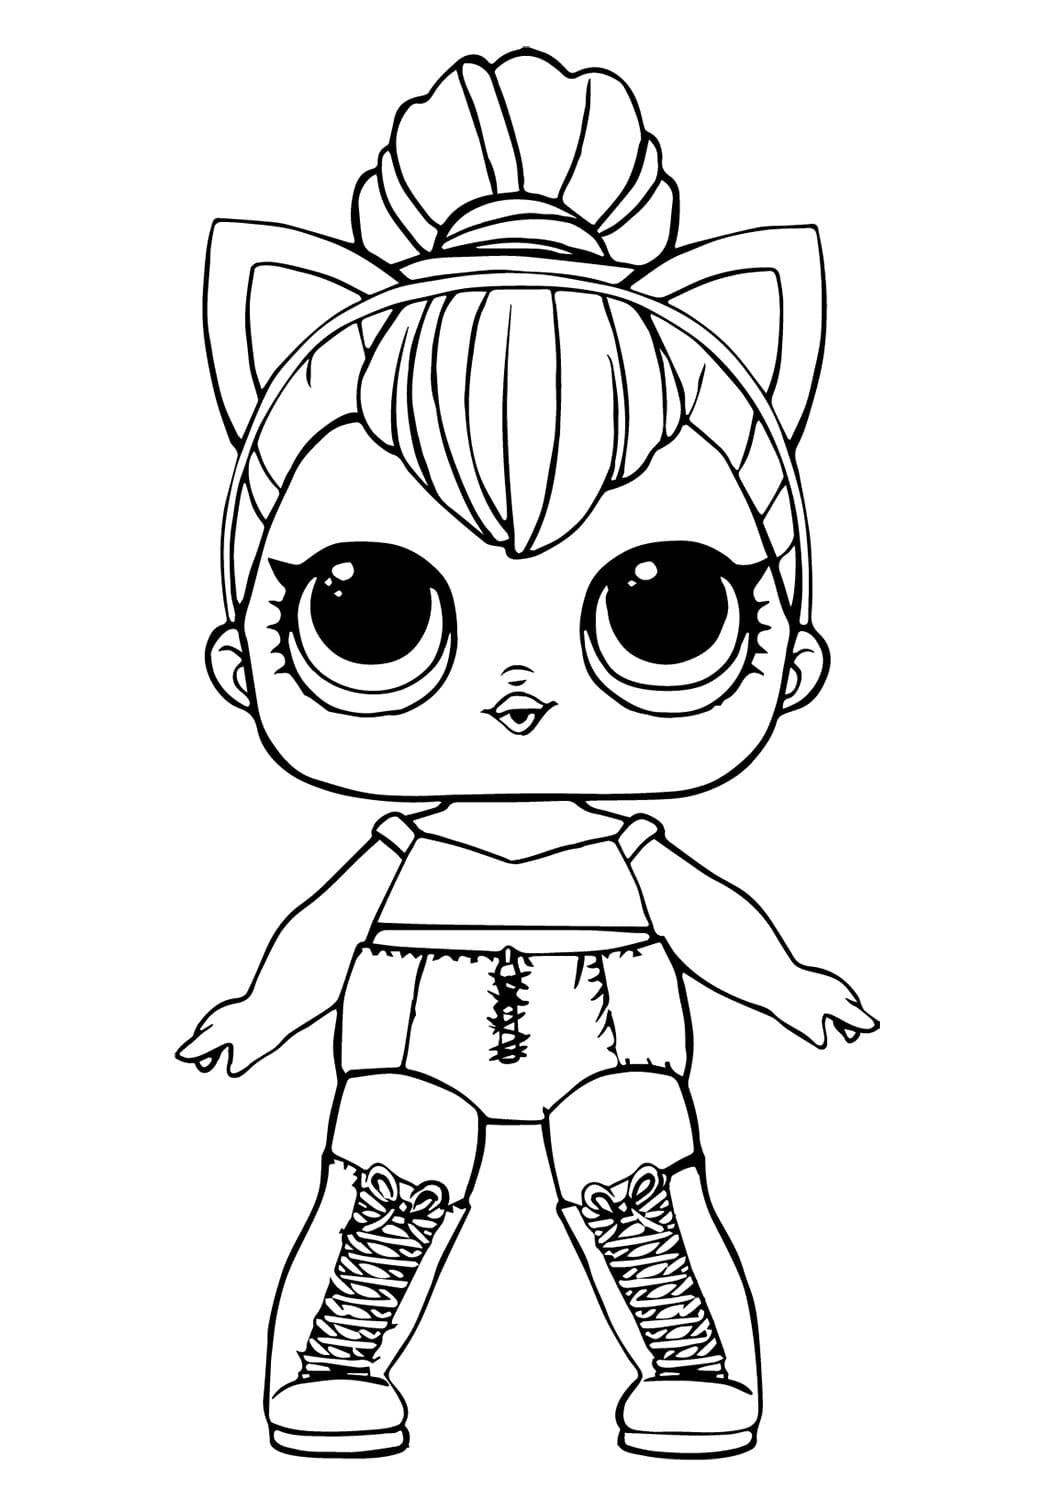 Lol Suprise Doll Kitty Queen Coloring Page Free Printable Coloring Pages